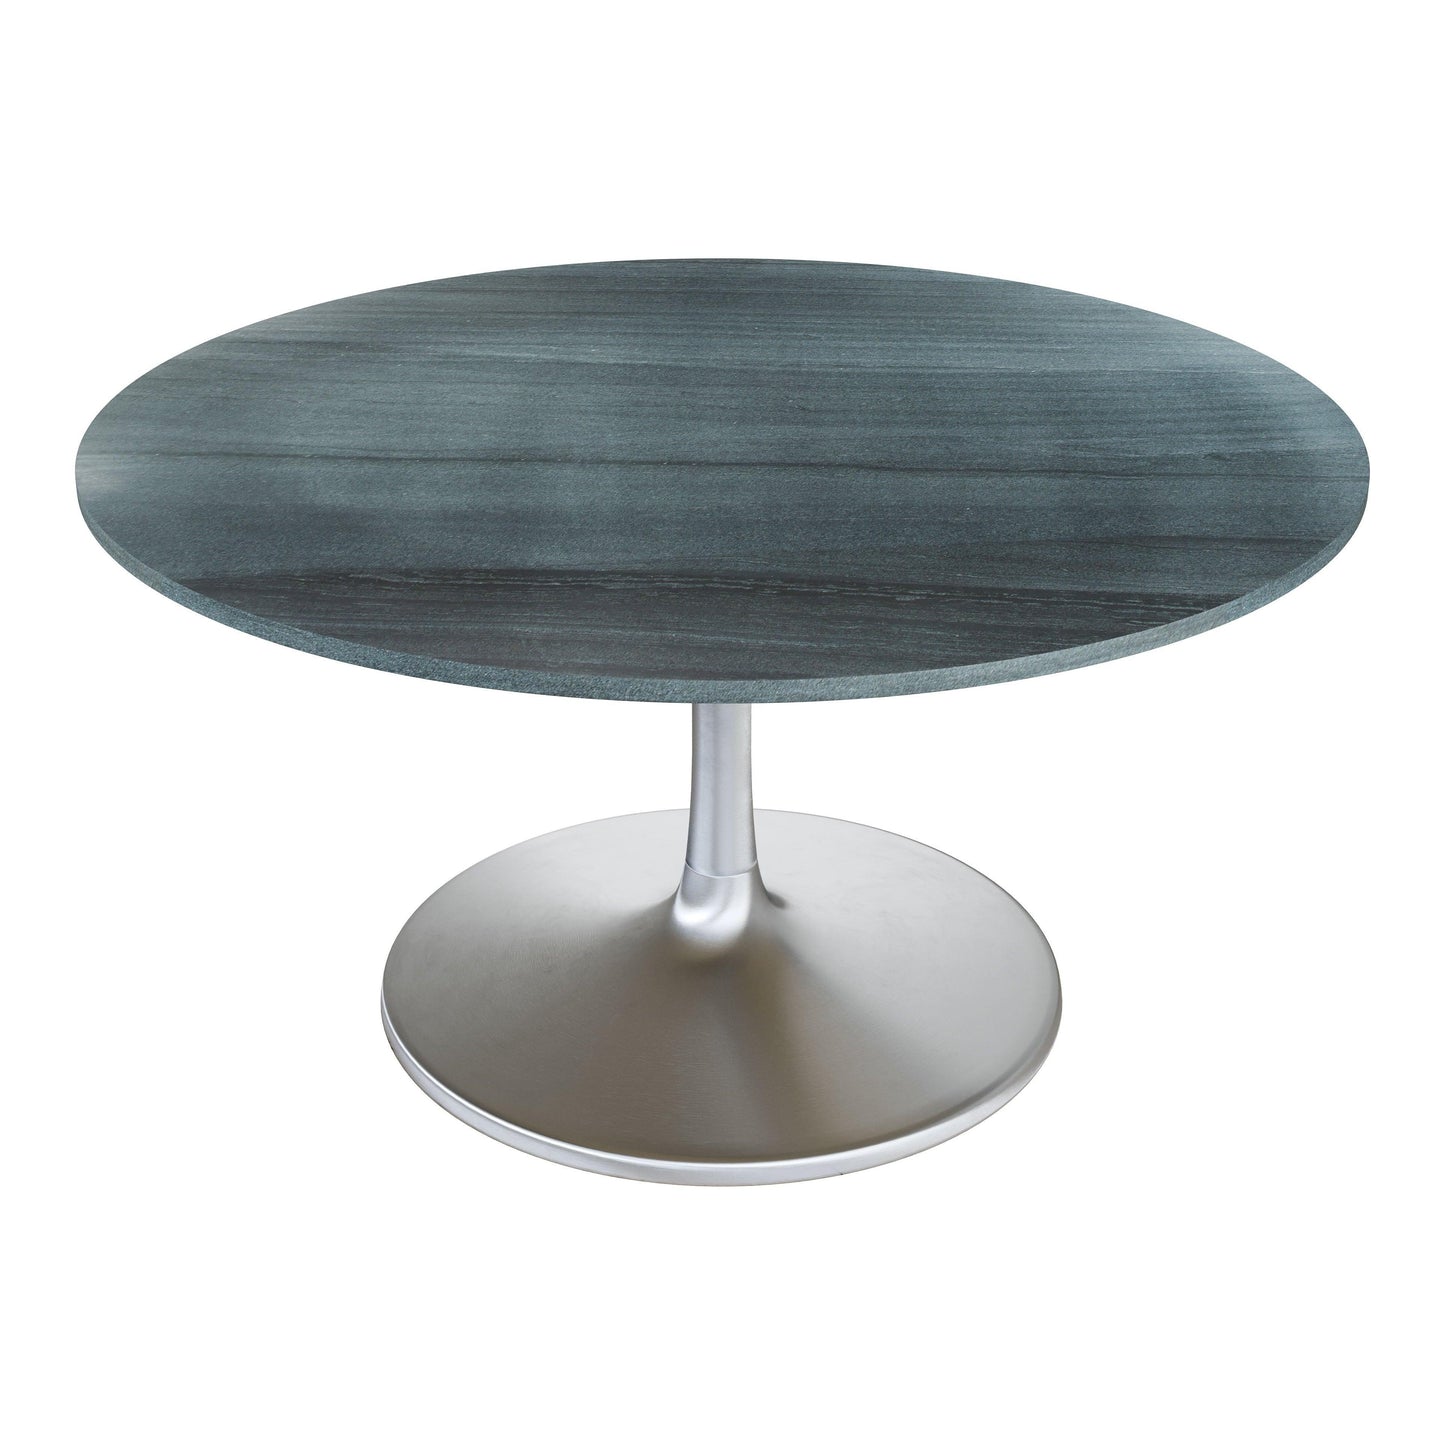 Metropolis Dining Table 60" Black - Sideboards and Things Brand_Zuo Modern, Color_Black, Color_Silver, Finish_Polished, Height_30-40, Materials_Metal, Materials_Stone, Materials_Wood, Metal Type_Aluminum, Metal Type_Iron, Product Type_Dining Height, Shape_Round, Stone Type_Marble, Table Base_Metal, Table Top_Stone, Width_50-60, Wood Species_MDF